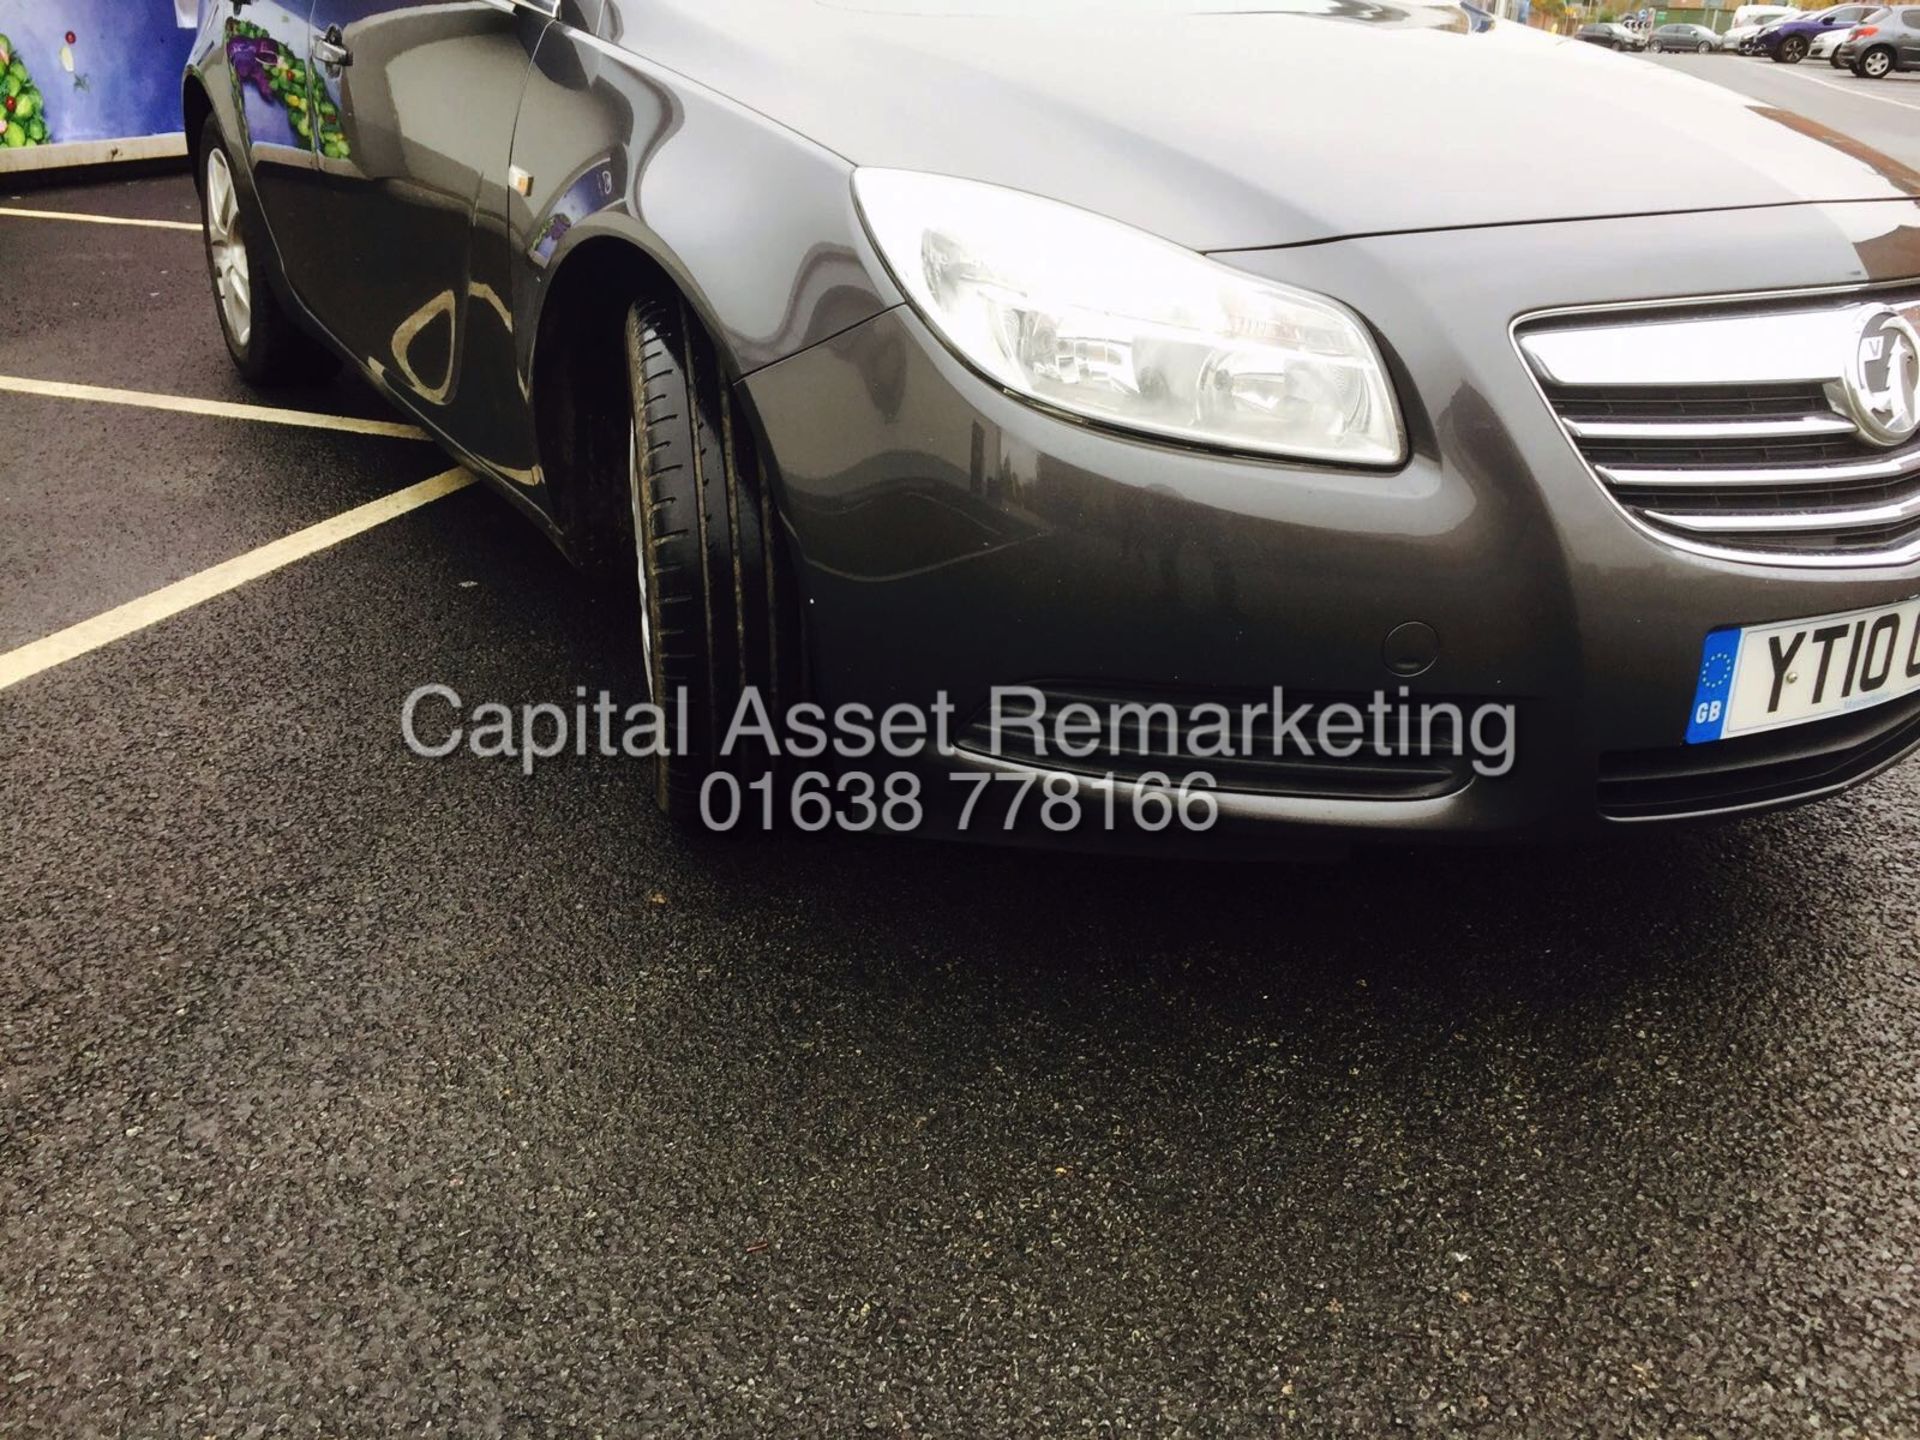 VAUXHALL INSIGNIA 2.0CDTI "EXECUTIVE" HATCHBACK - 1 PREVIOUS OWNER - AIR CON - GREAT SPEC - NO VAT!! - Image 4 of 16